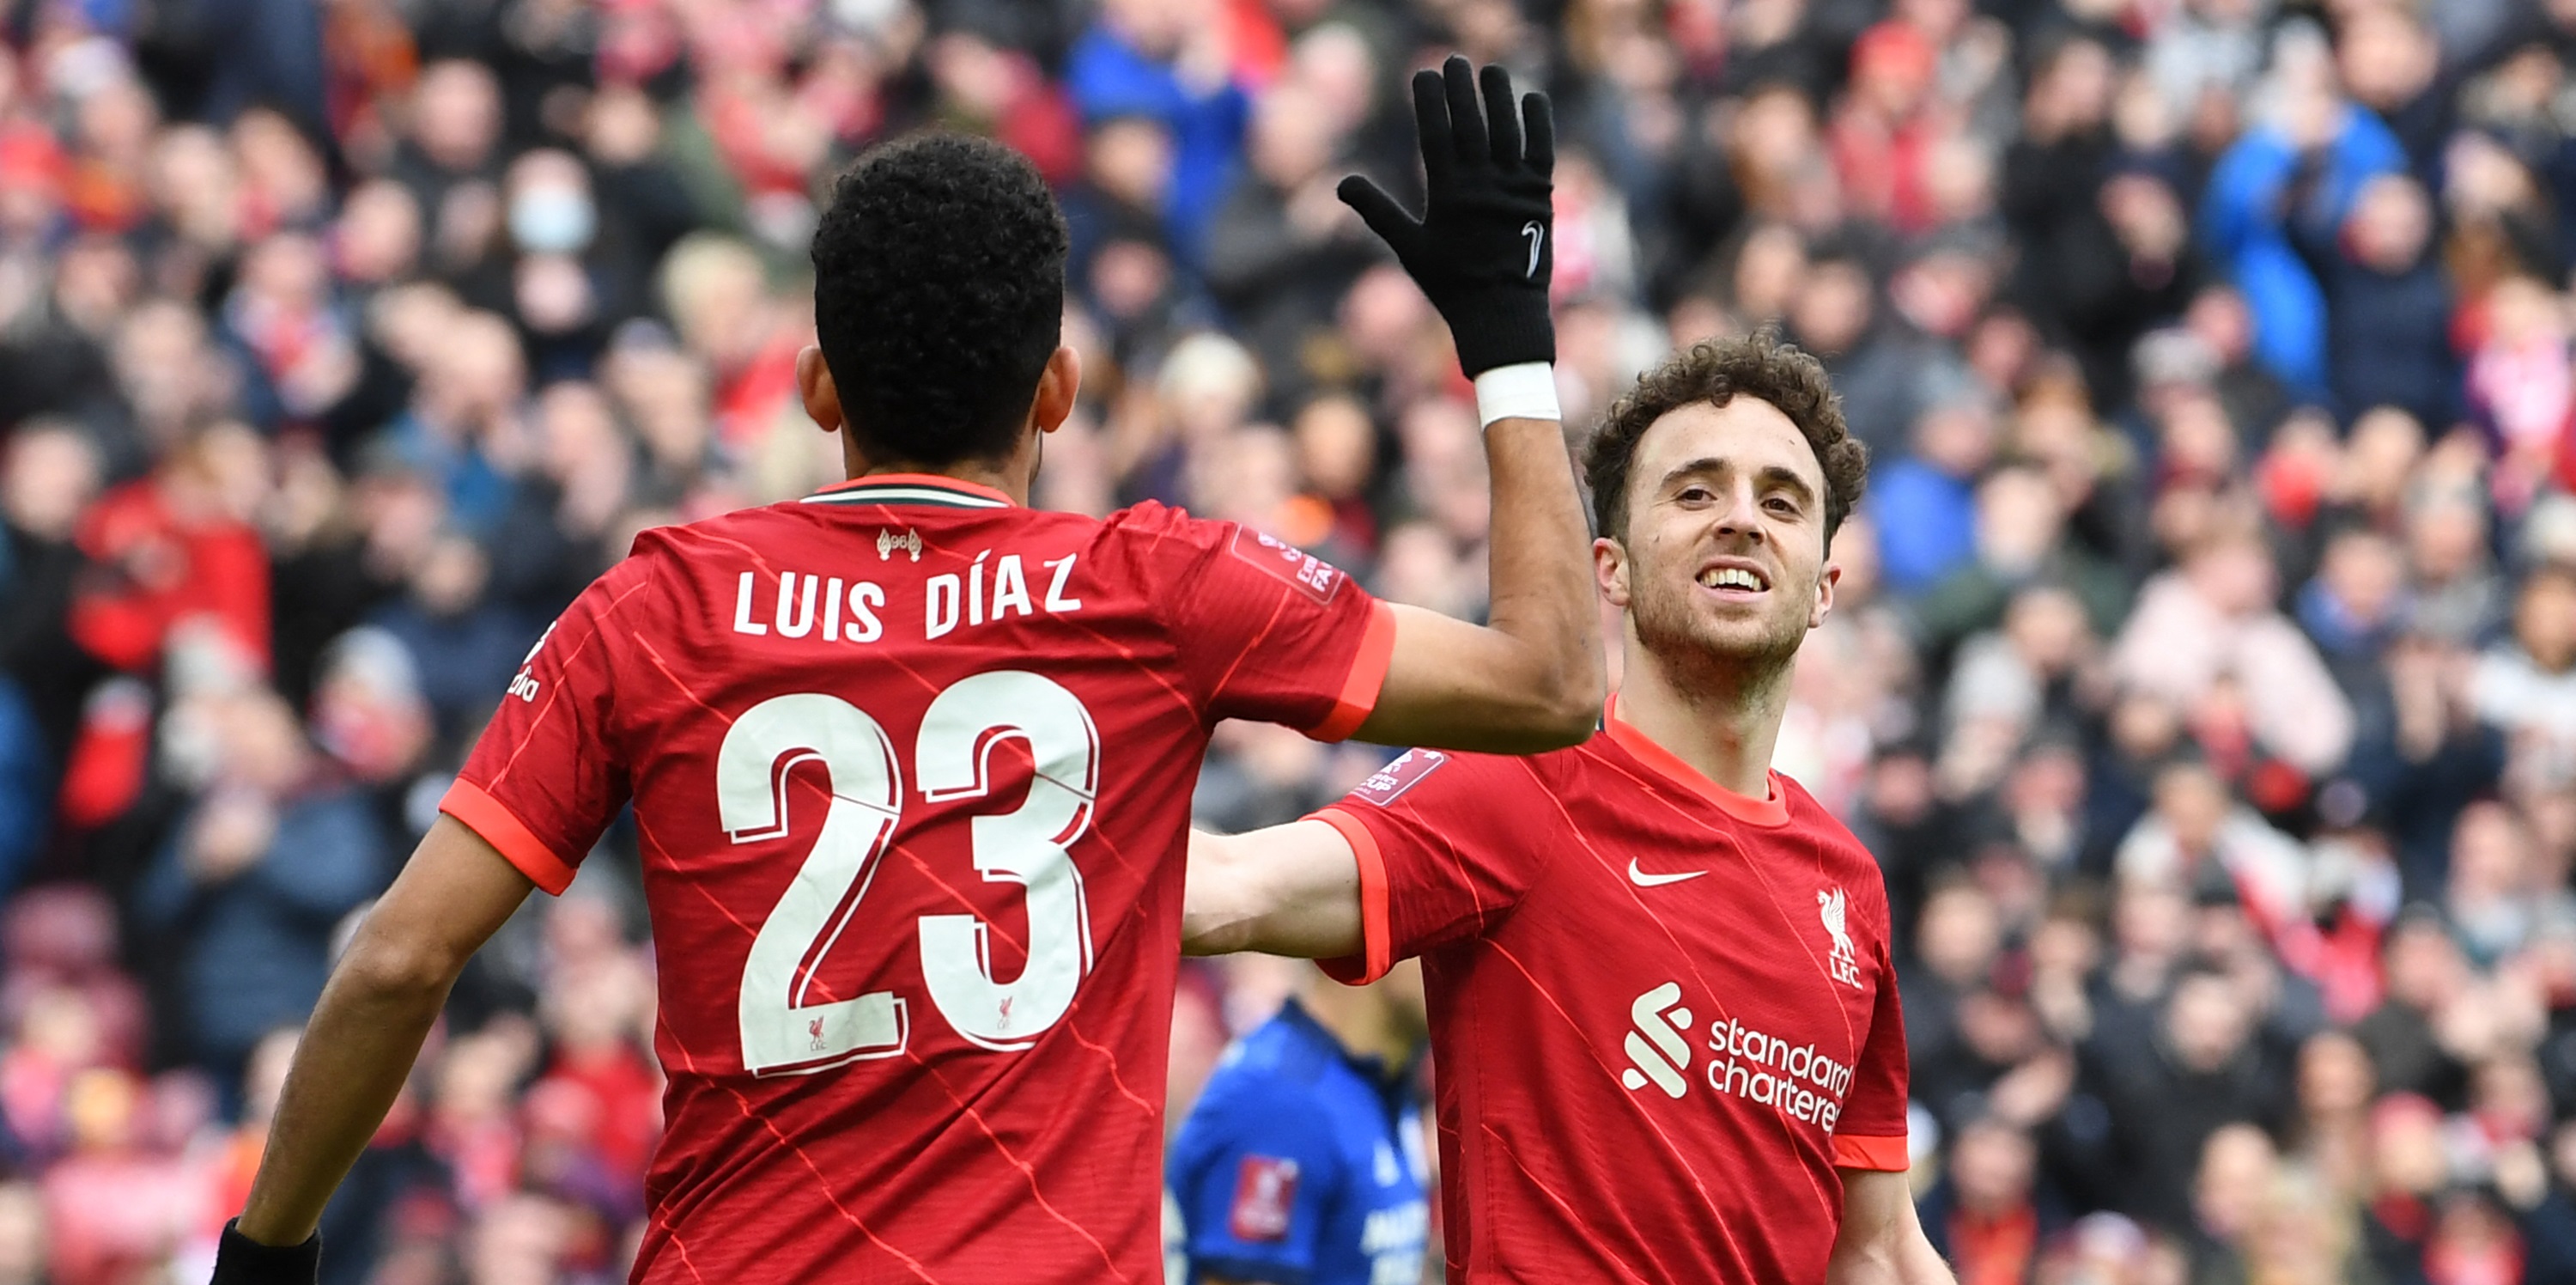 Trent on Luis Diaz and Diogo Jota's argument after Cardiff tie